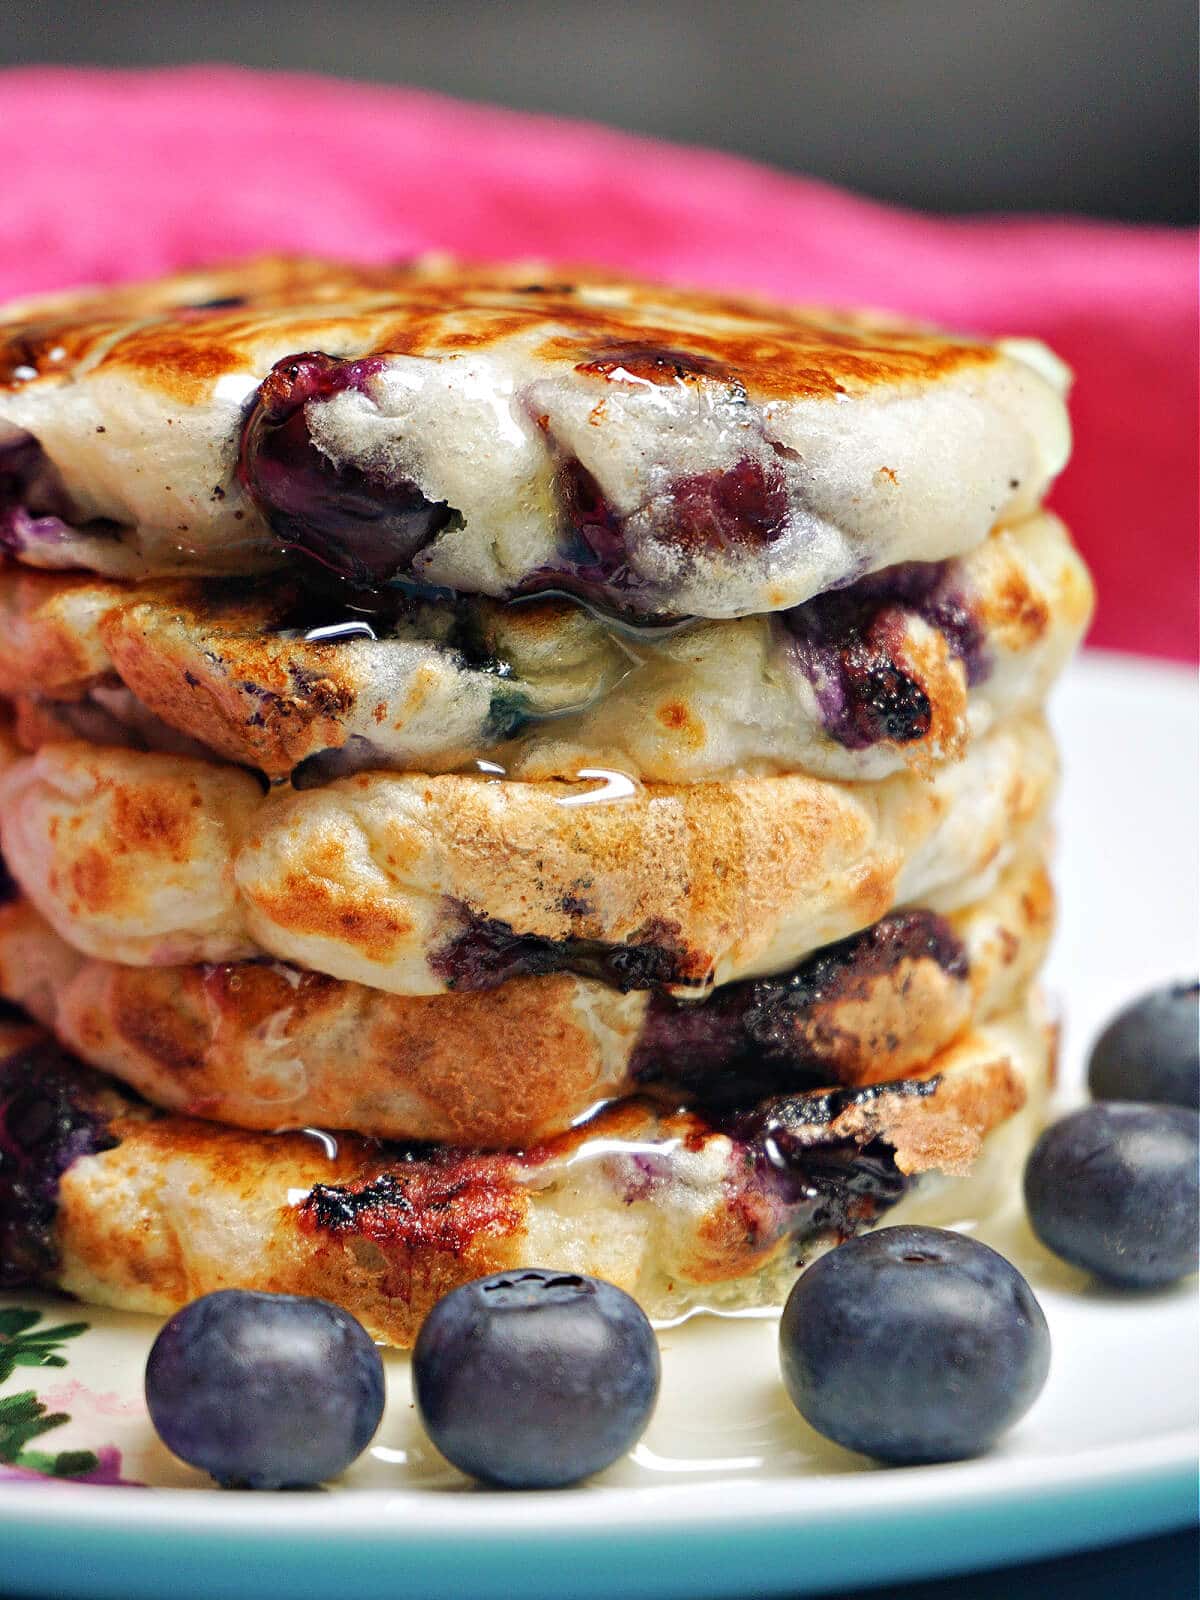 A pile of 5 pancakes with blueberries around.